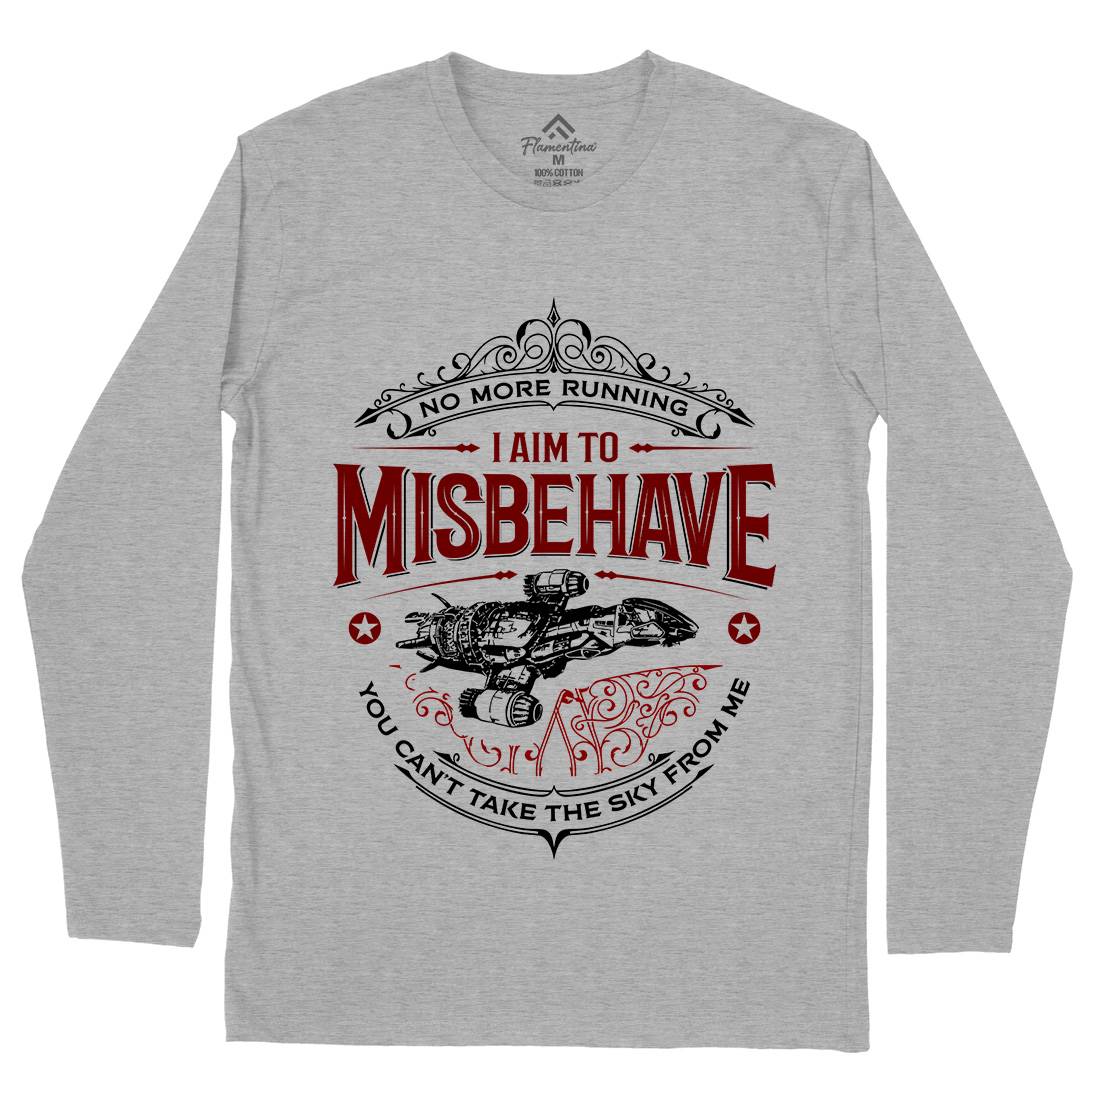 I Aim To Misbehave Mens Long Sleeve T-Shirt Space D435